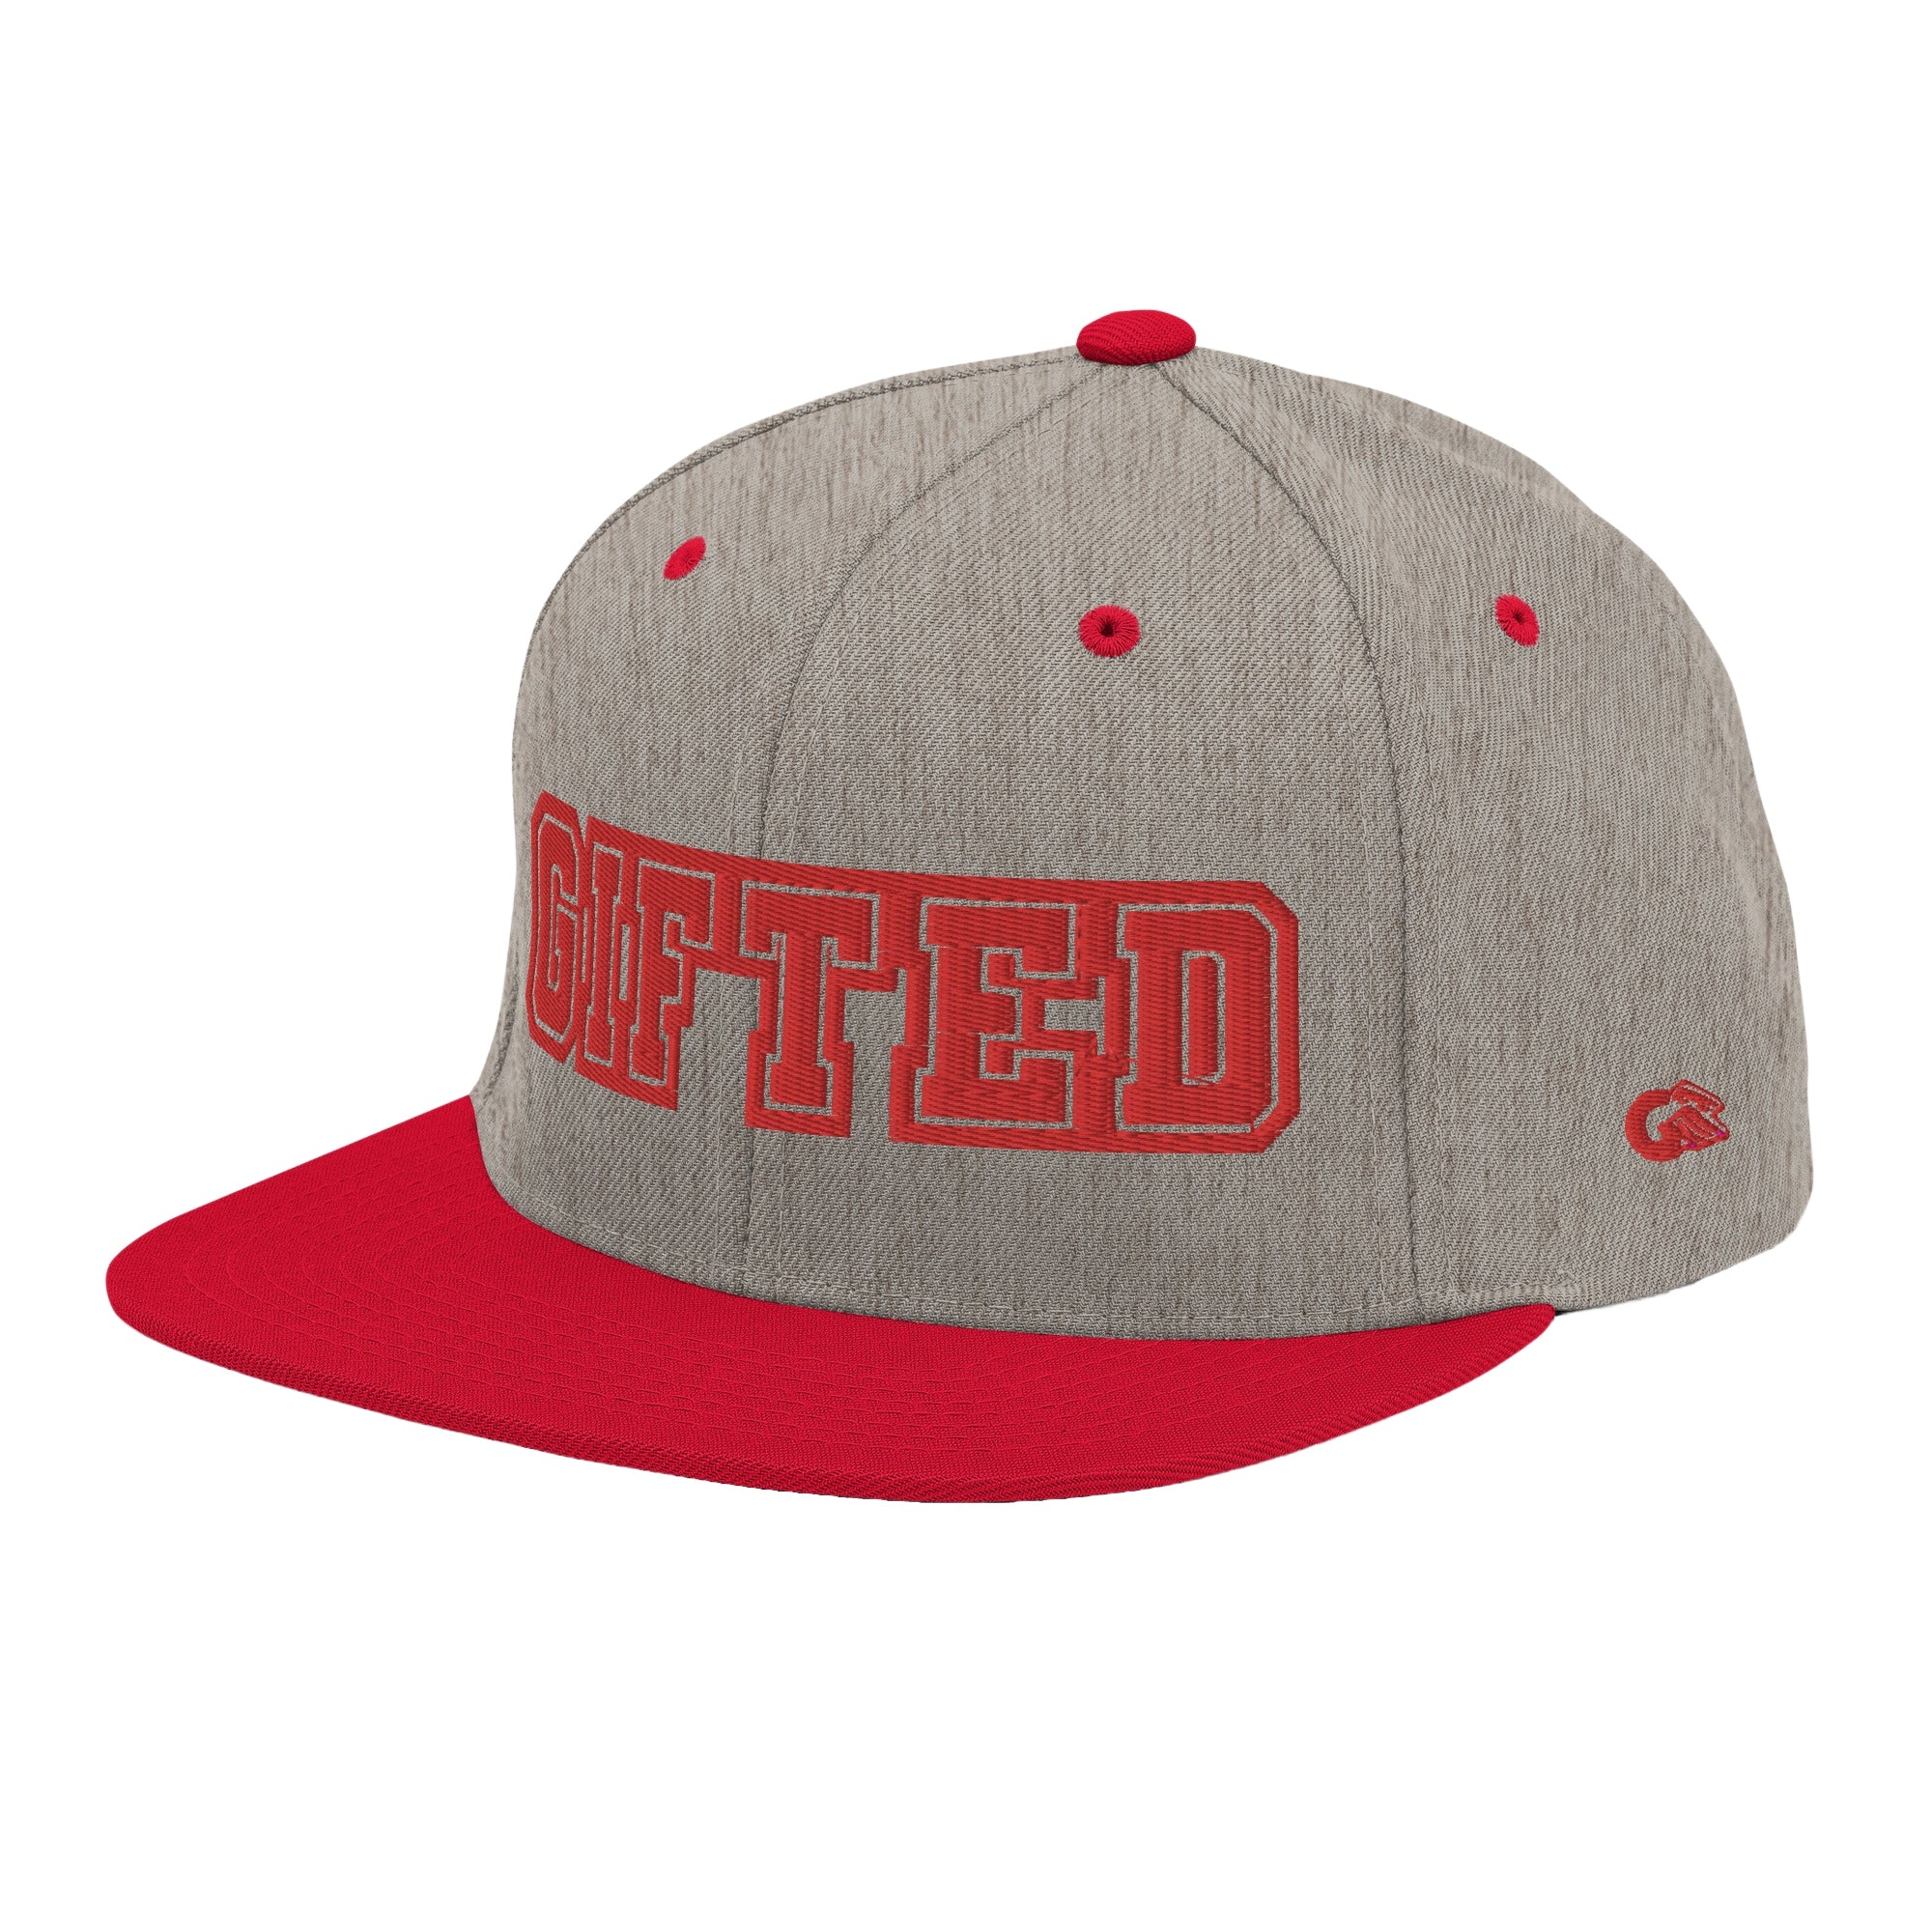 Gifted Snapback-Red